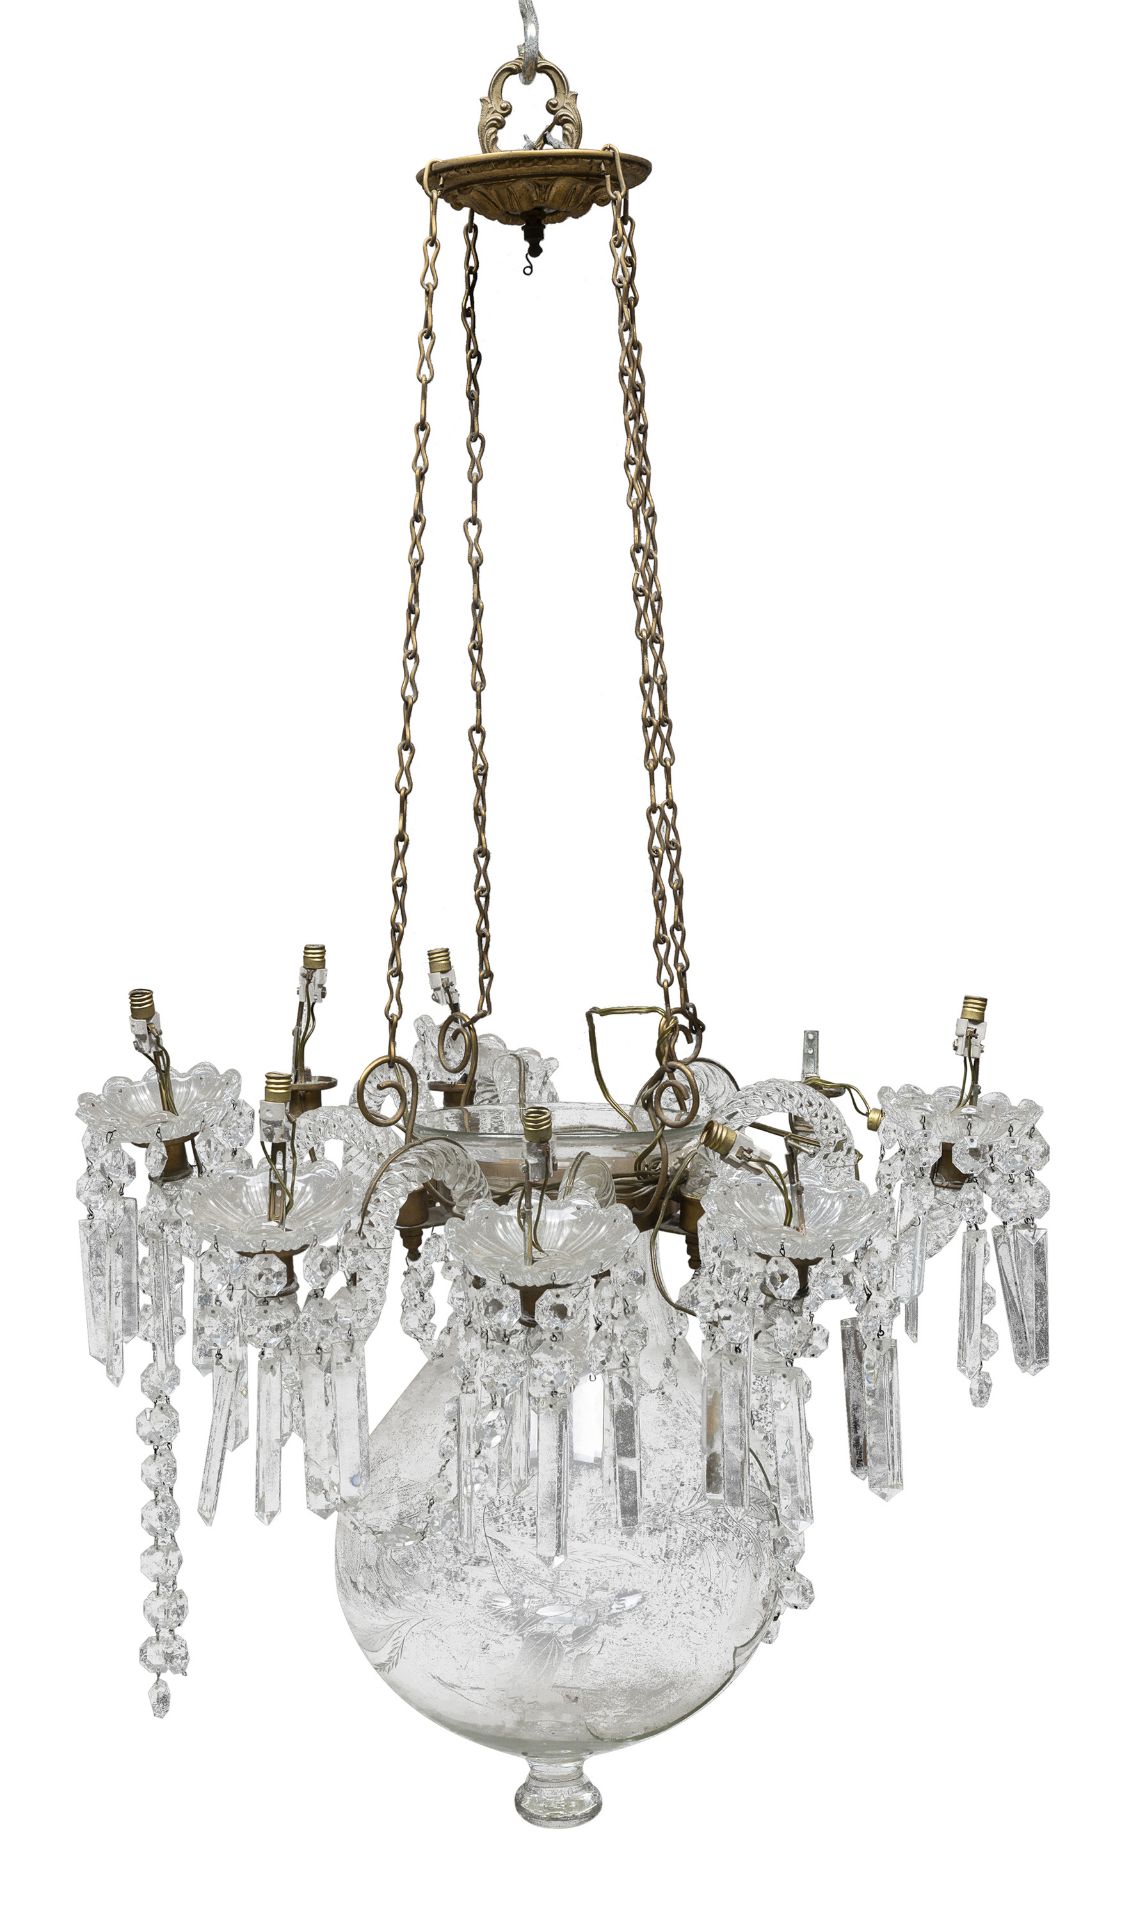 REMAINS OF A GLASS CHANDELIER END OF THE 19TH CENTURY